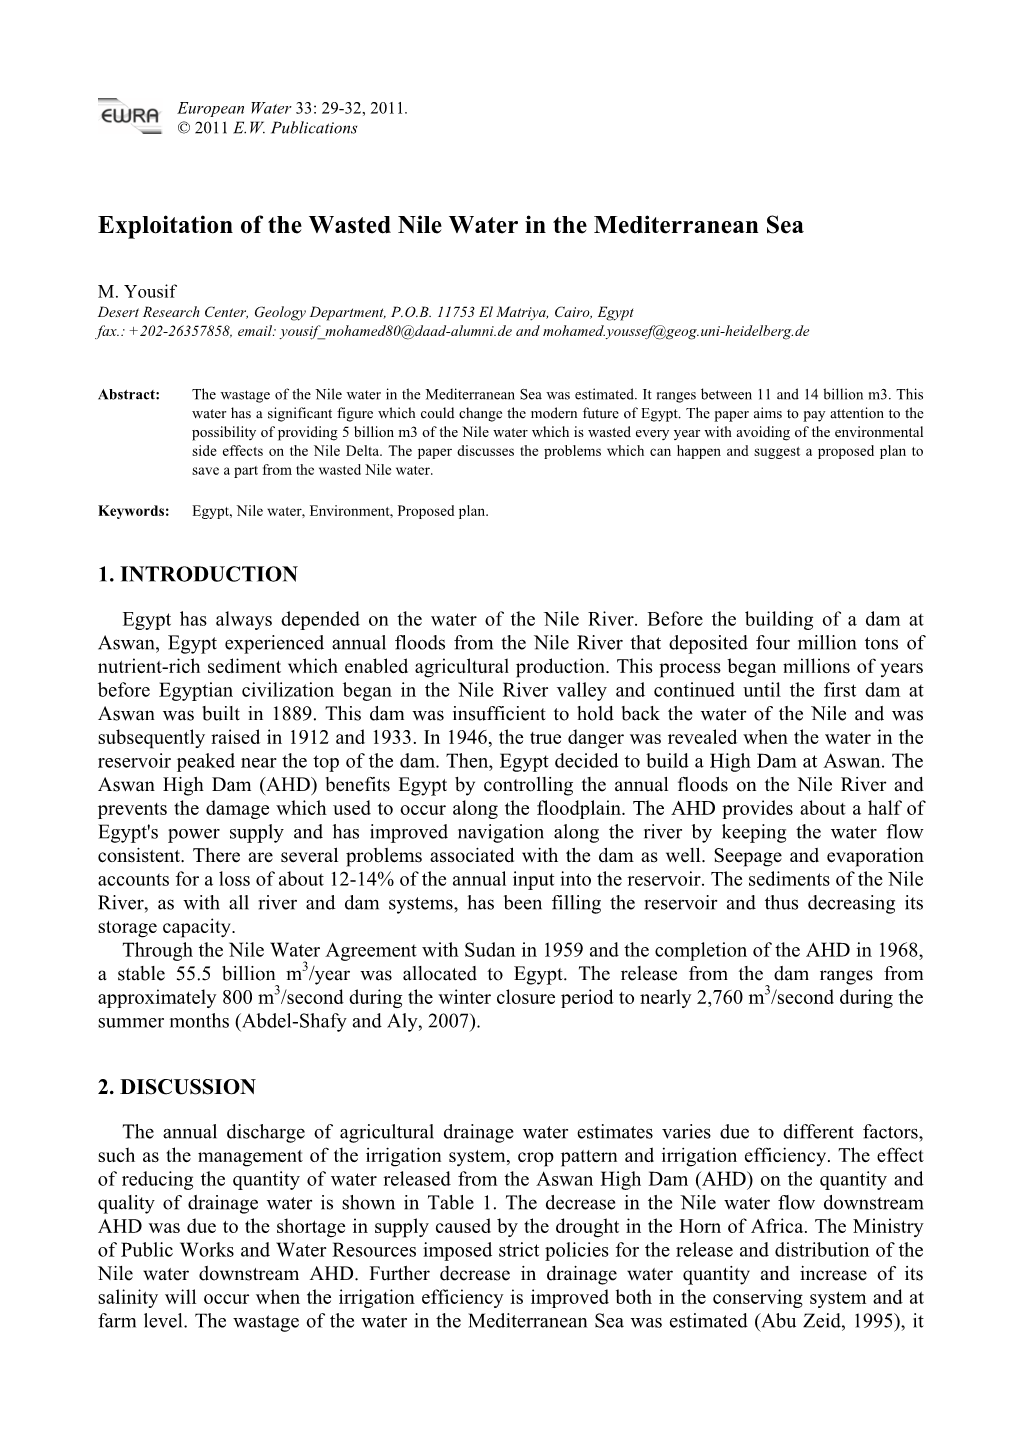 Exploitation of the Wasted Nile Water in the Mediterranean Sea